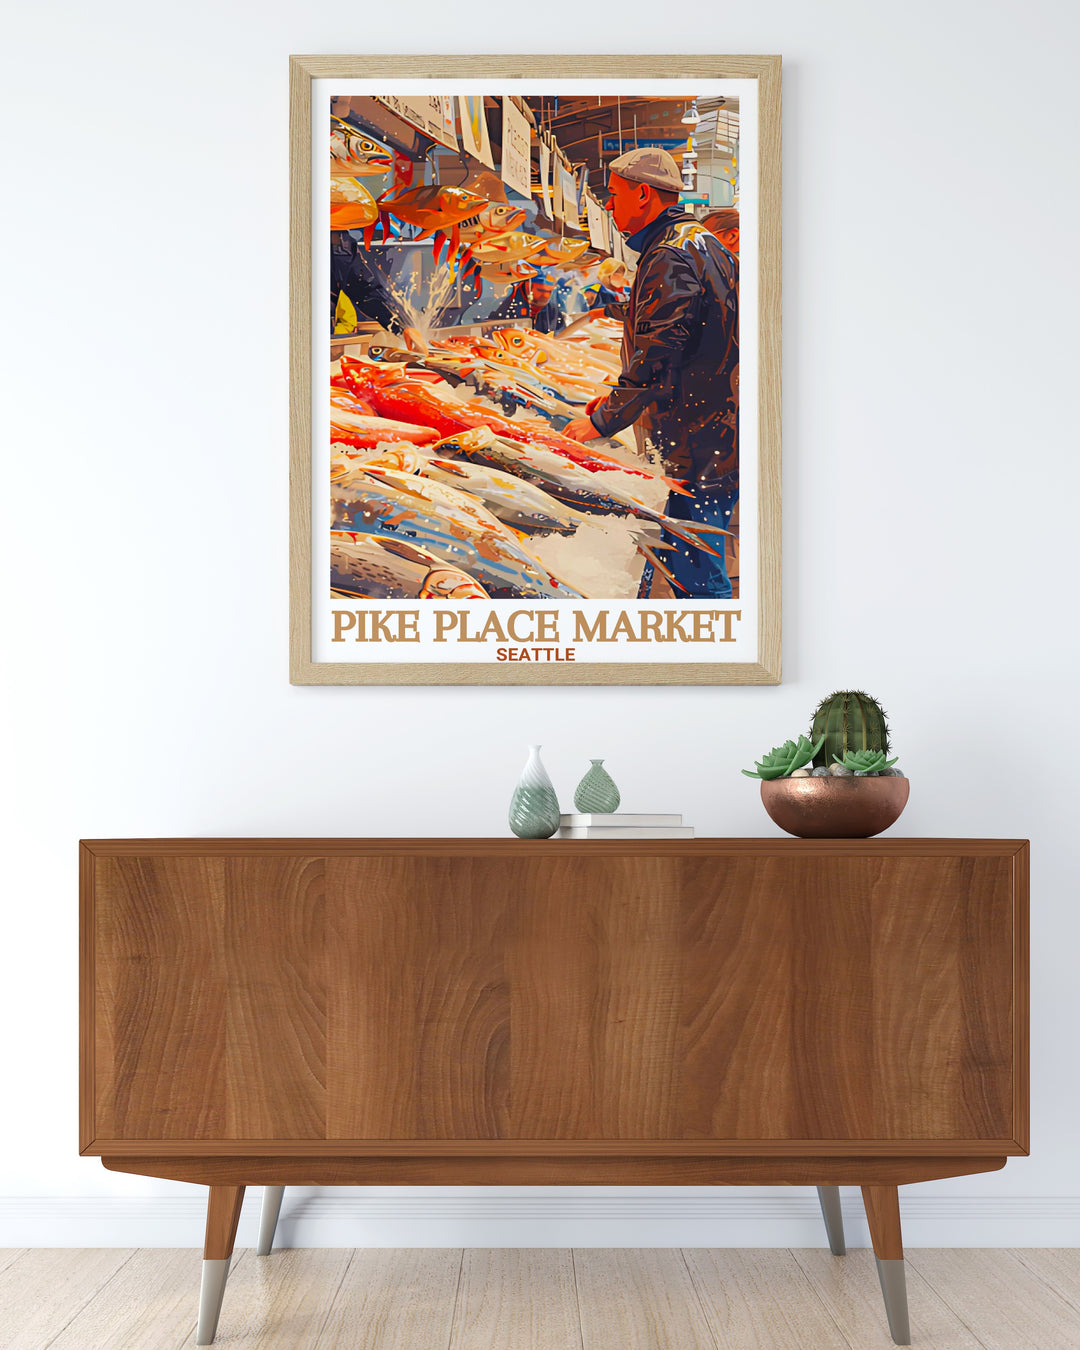 Travel print of Seattle highlighting Pike Place Market with its vibrant stalls and beautiful bay views perfect for enhancing your home decor includes the lively Pike Place Fish Market capturing the citys maritime culture